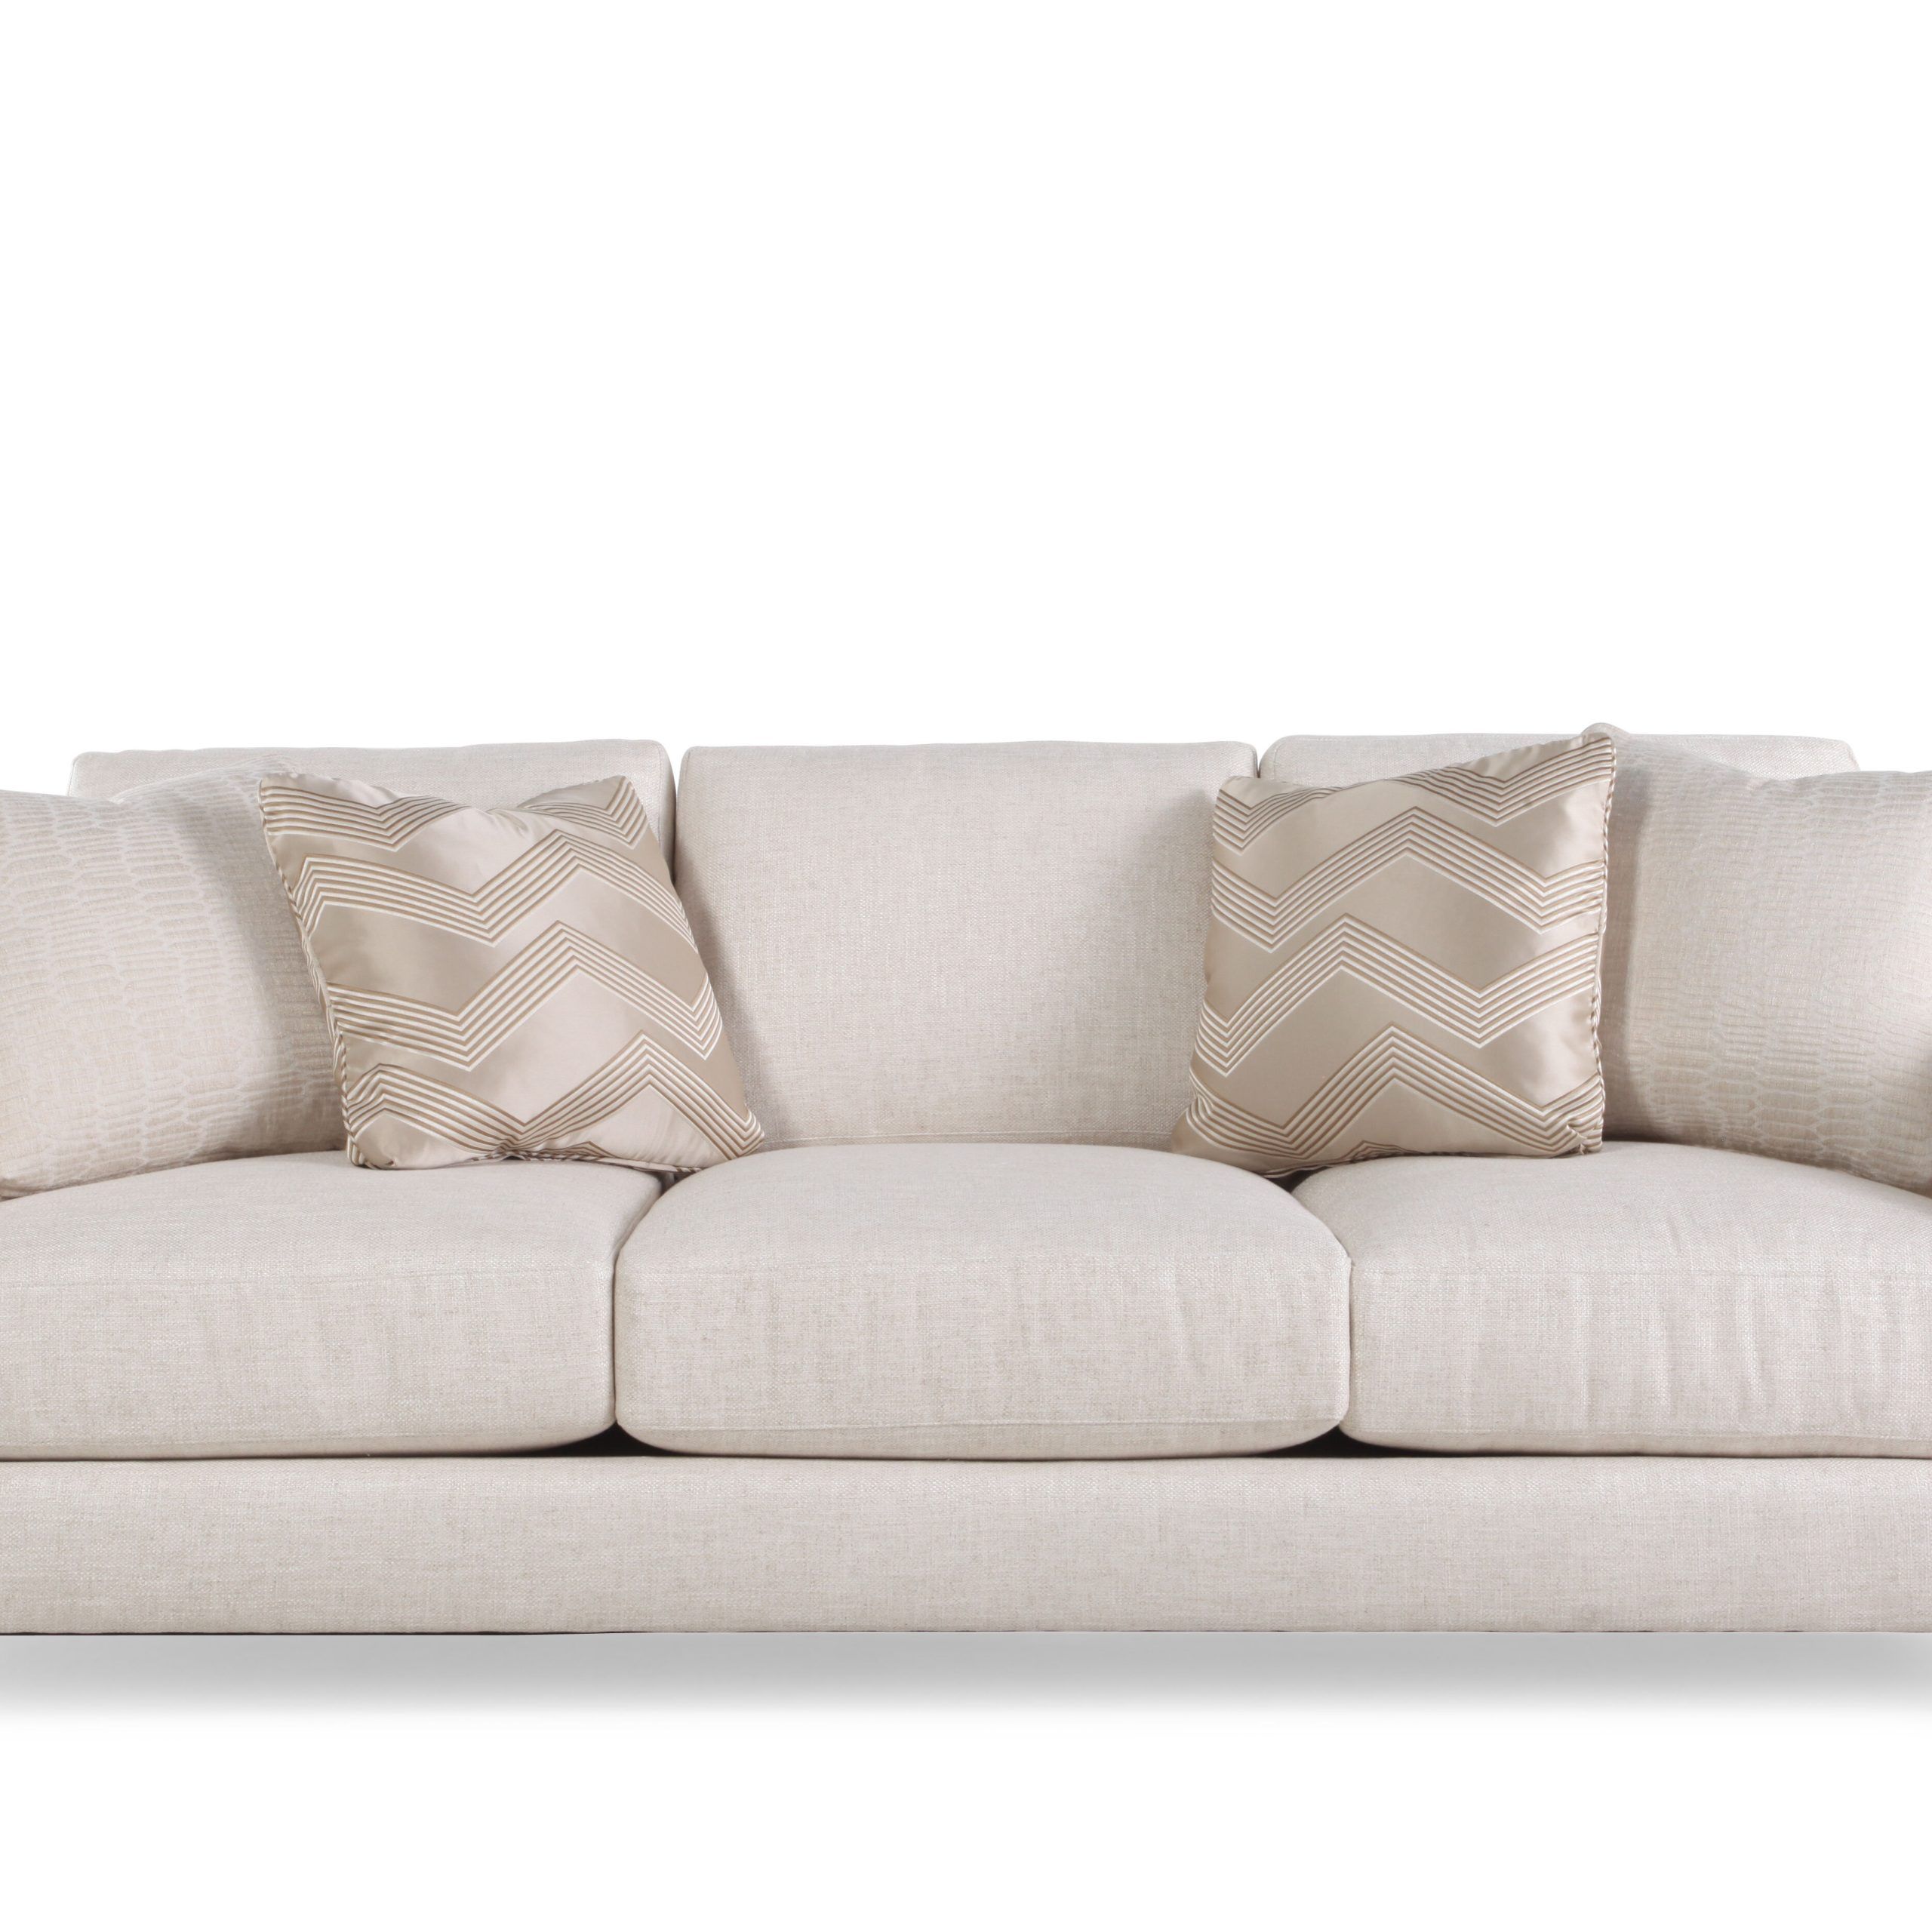 Featured Photo of The 20 Best Collection of Sofas in Cream